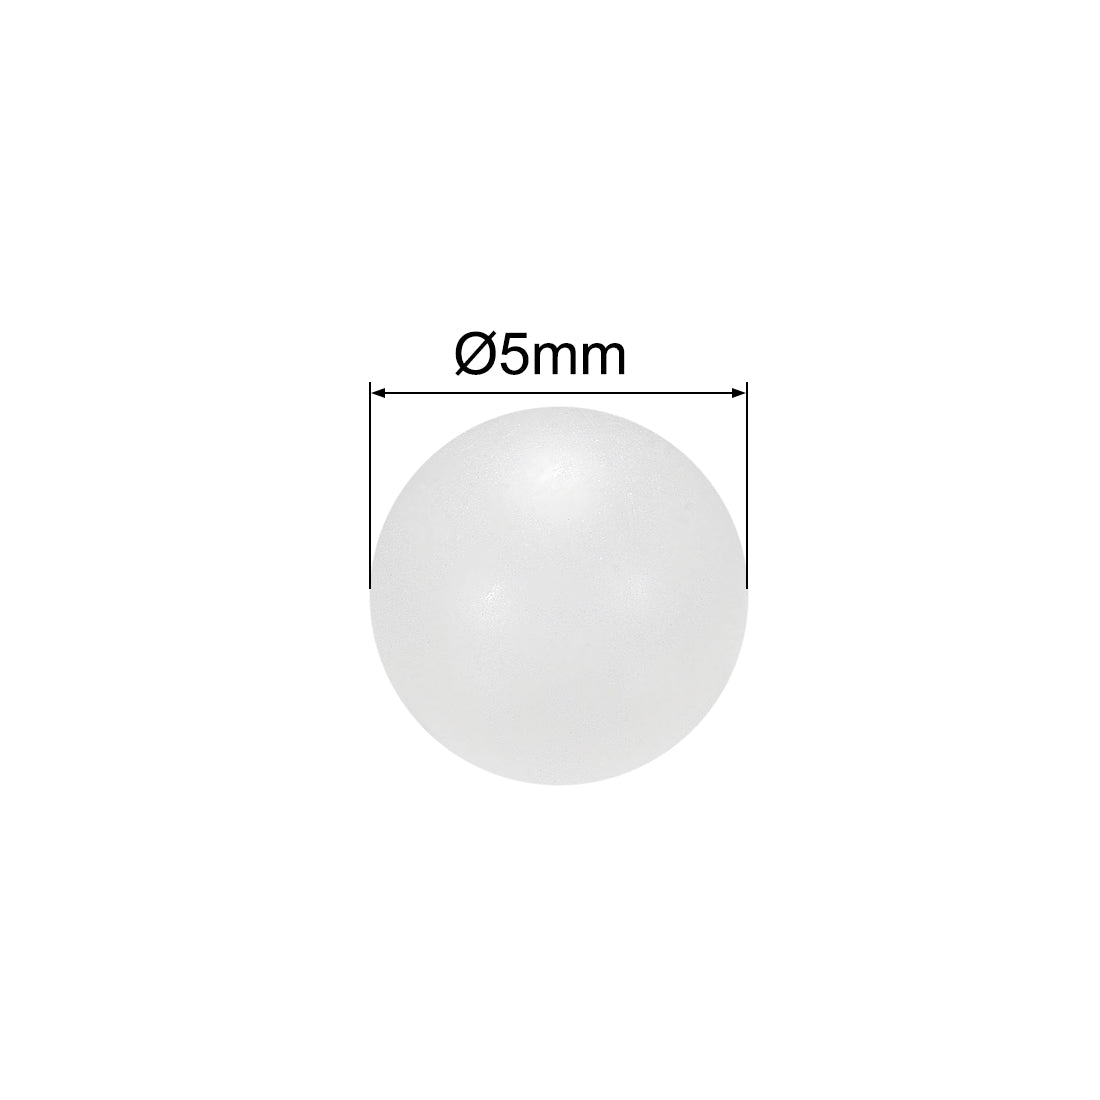 Uxcell Uxcell 7mm PP Solid Plastic Balls, Precision Bearing Ball 200pcs